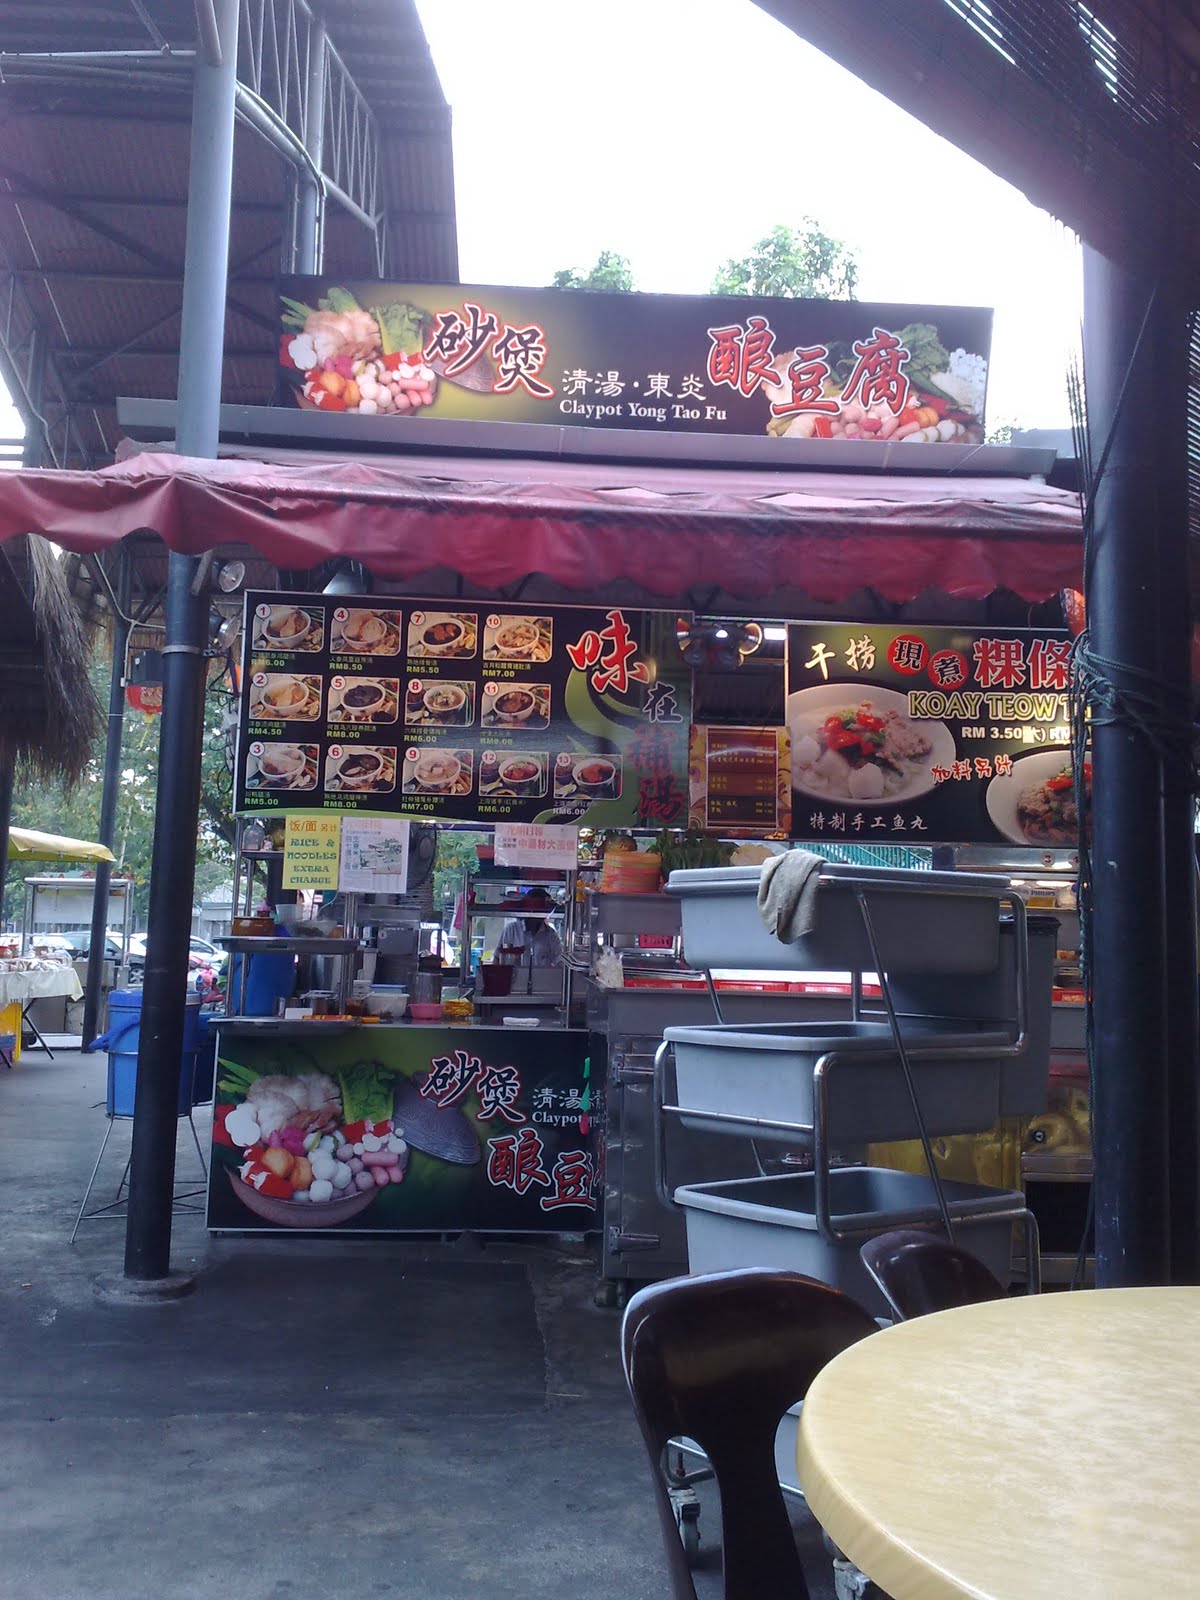 Sungai Pinang Food Court - Sungai Pinang Food Court : Formerly known as